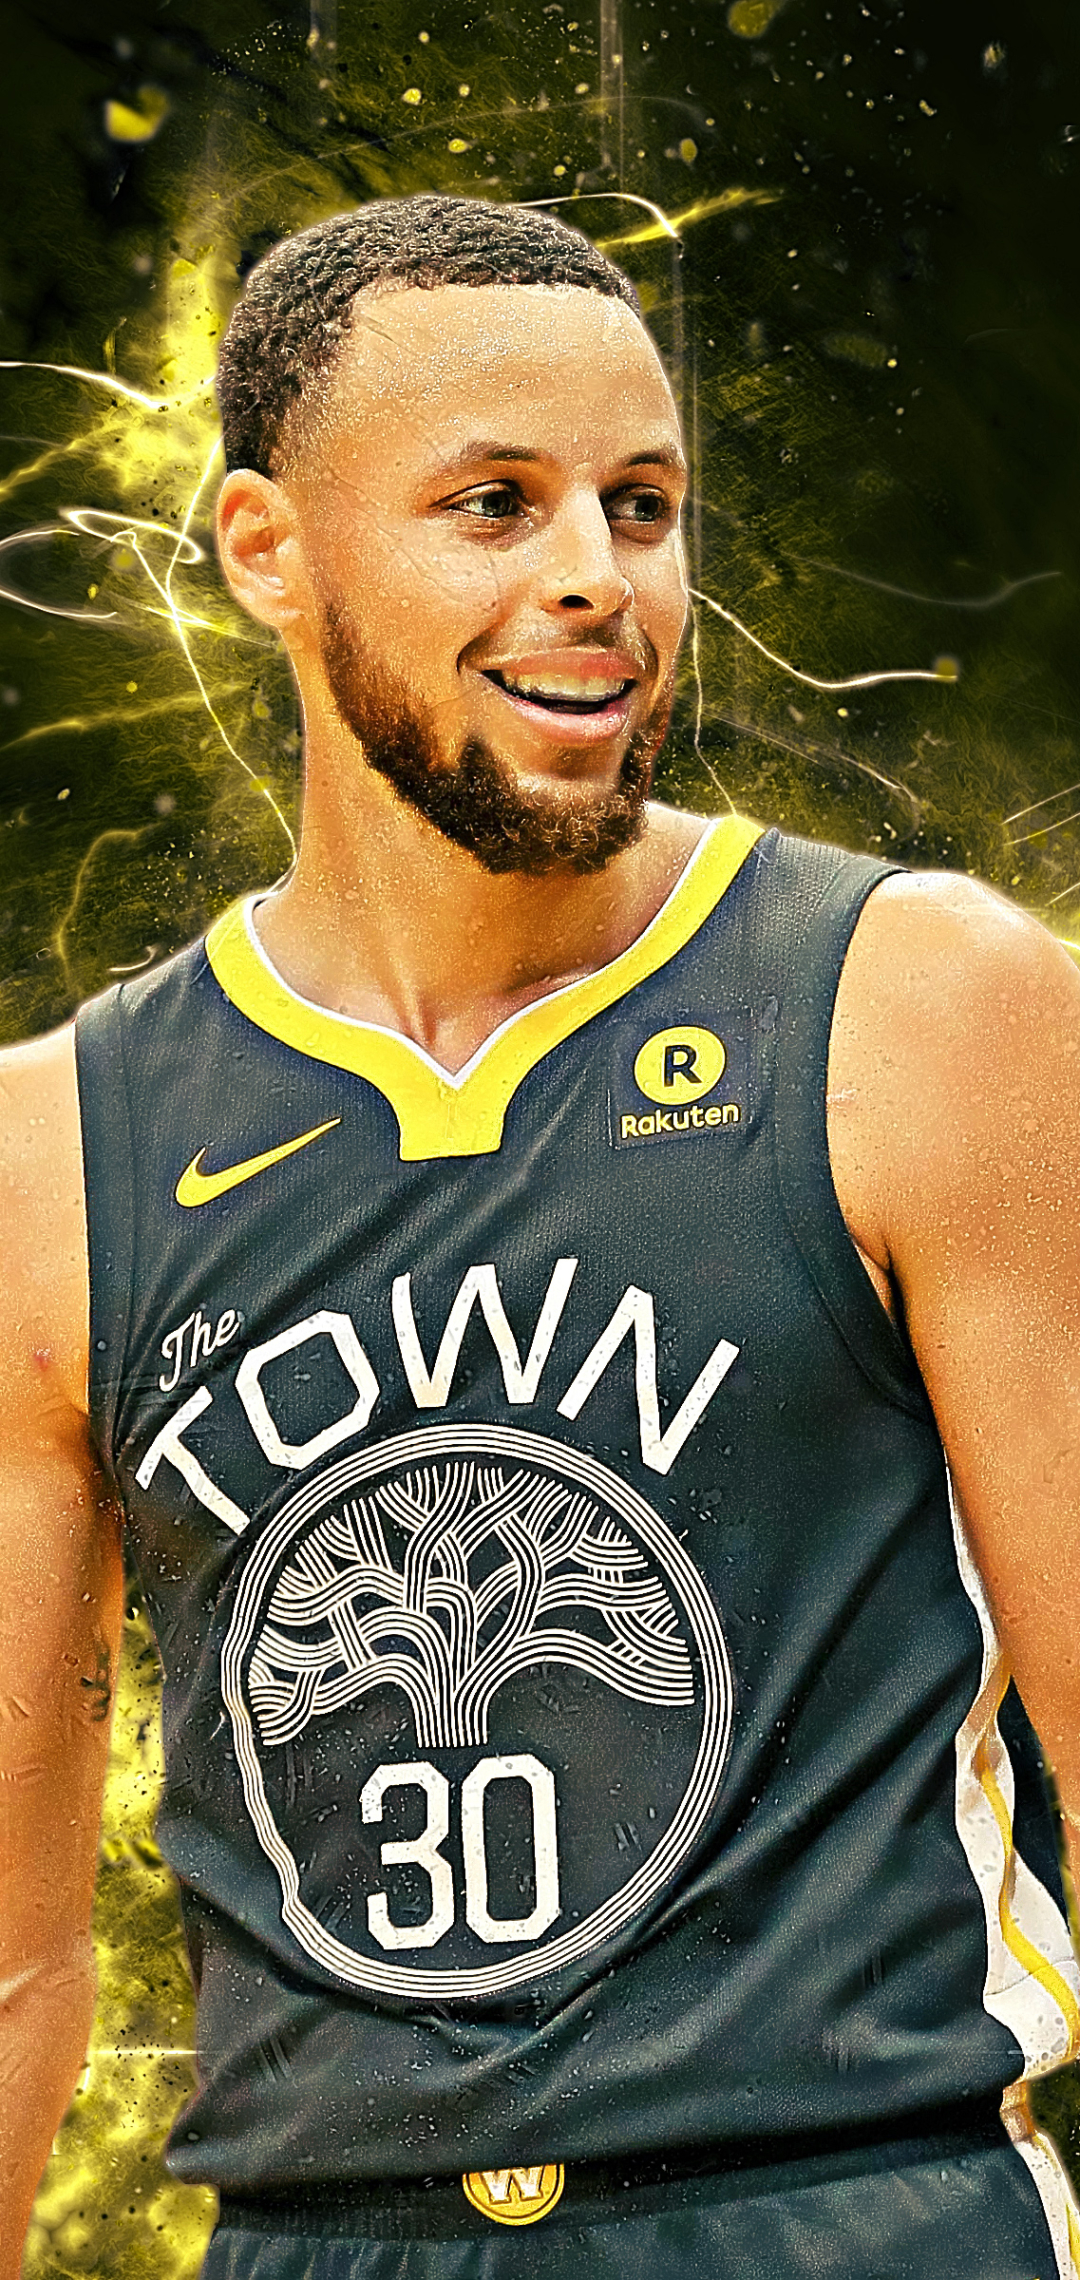 Stephen Curry Phone Wallpaper